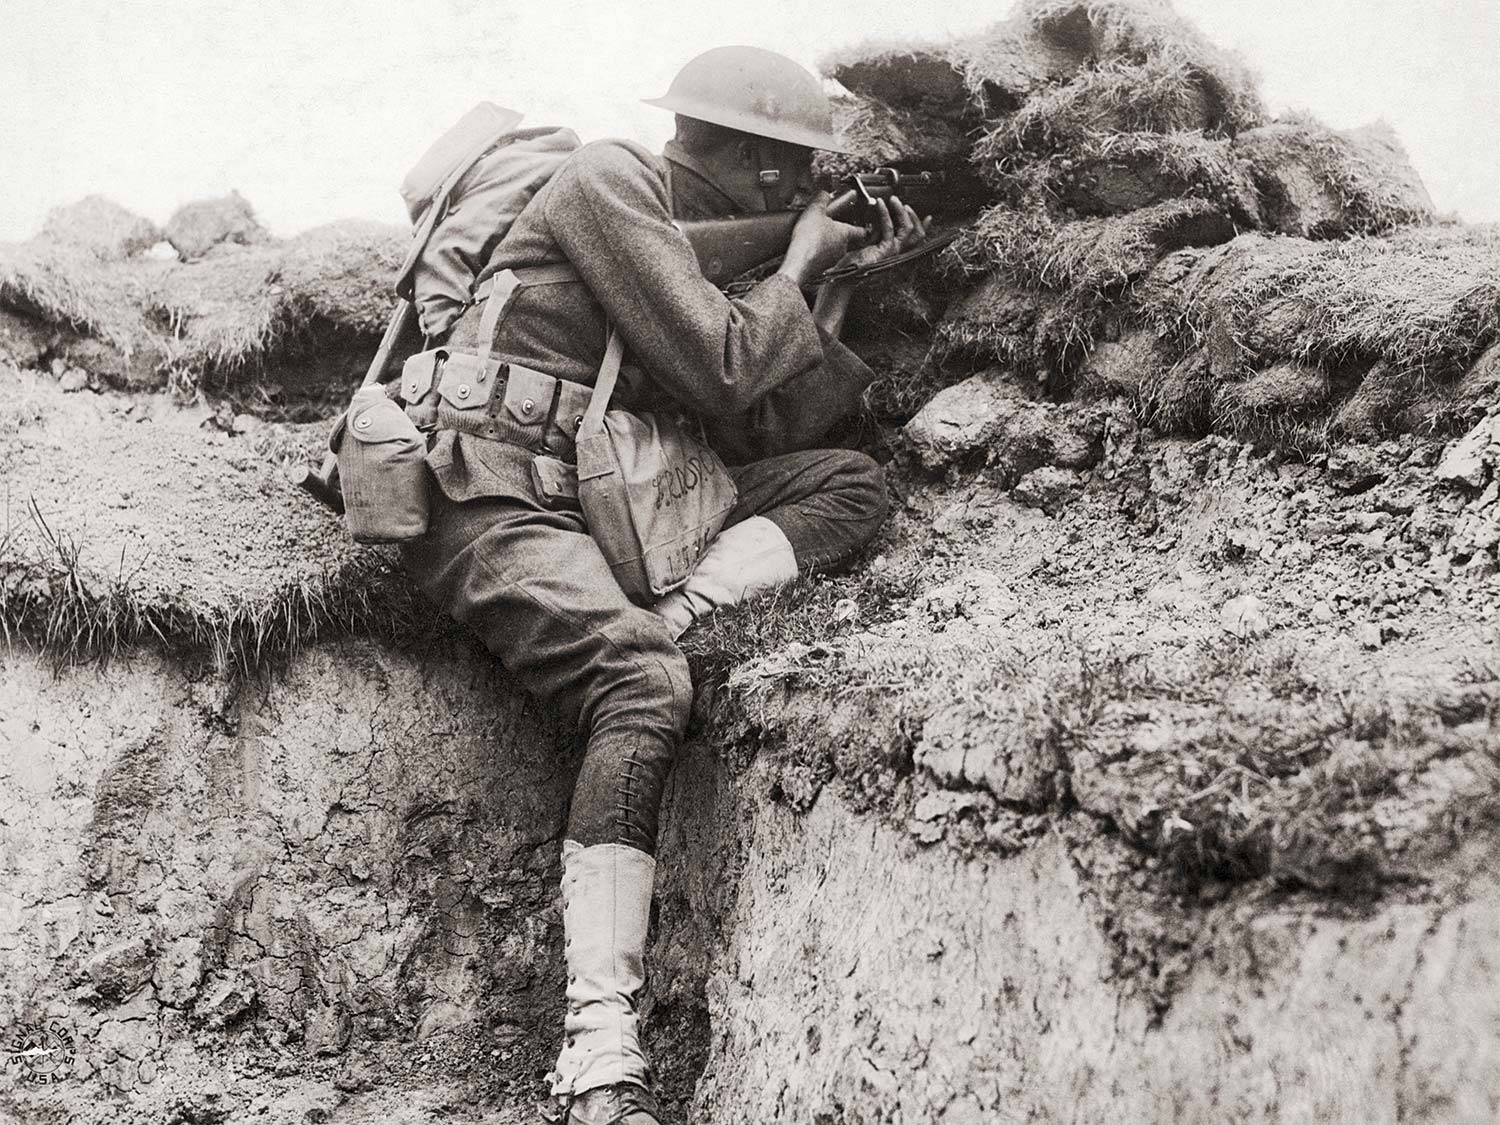 An American sniper in France during World War I, circa 1918. (Photo by FPG/Hulton Archive/Getty Images)